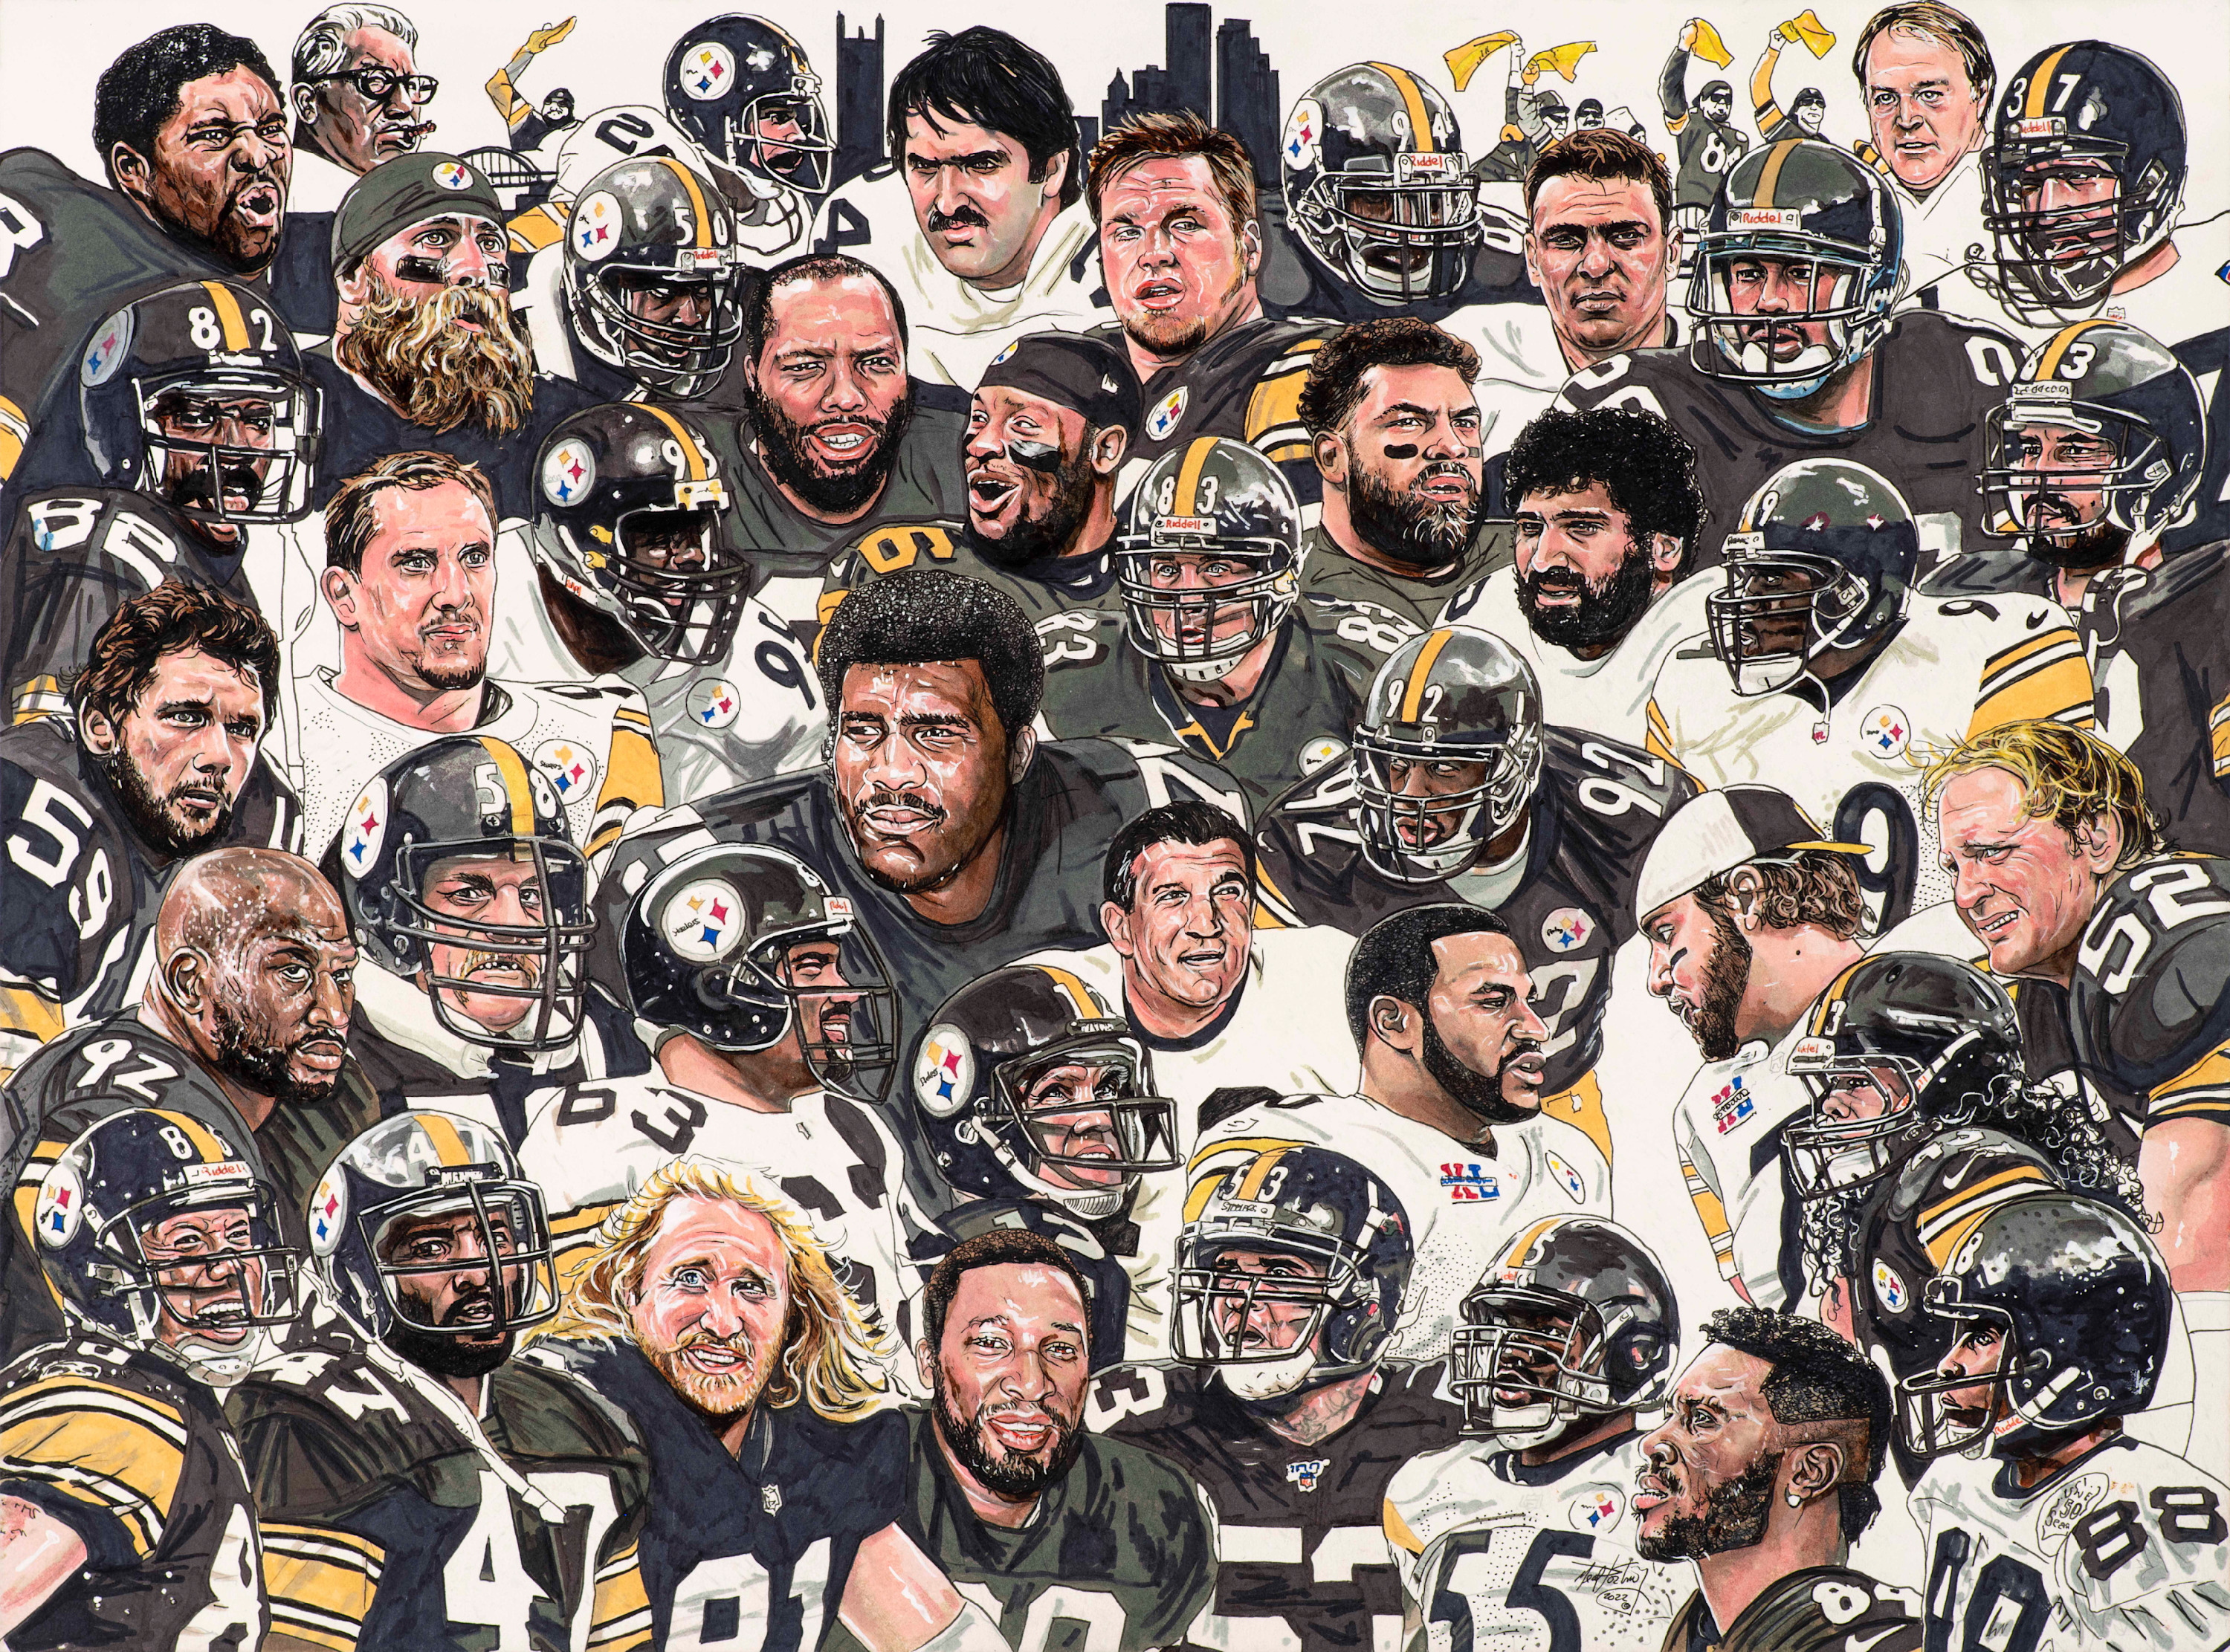 Pittsburgh steelers low res szxoqd